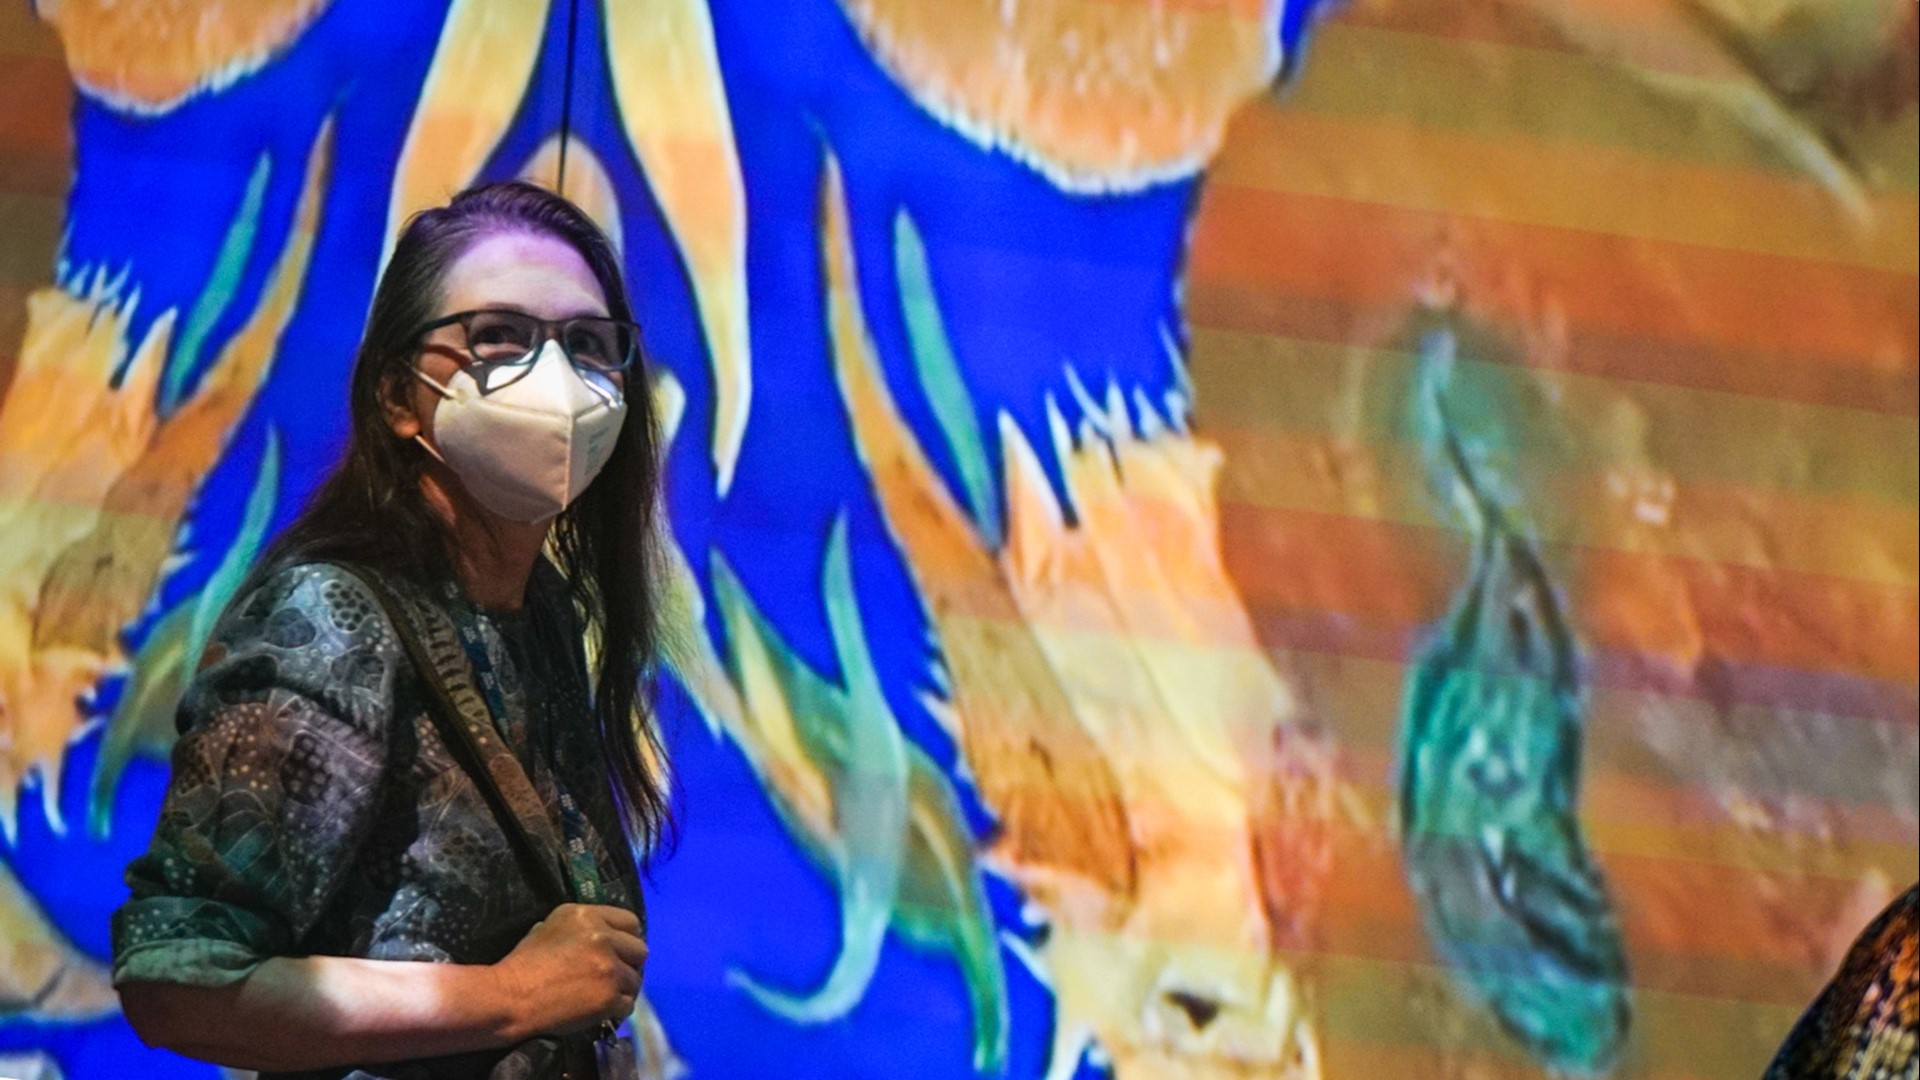 The immersive gallery features a 35-minute loop of over 400 Van Gogh works in a 360-degree experience, all coming to West Sacramento for the next six months.